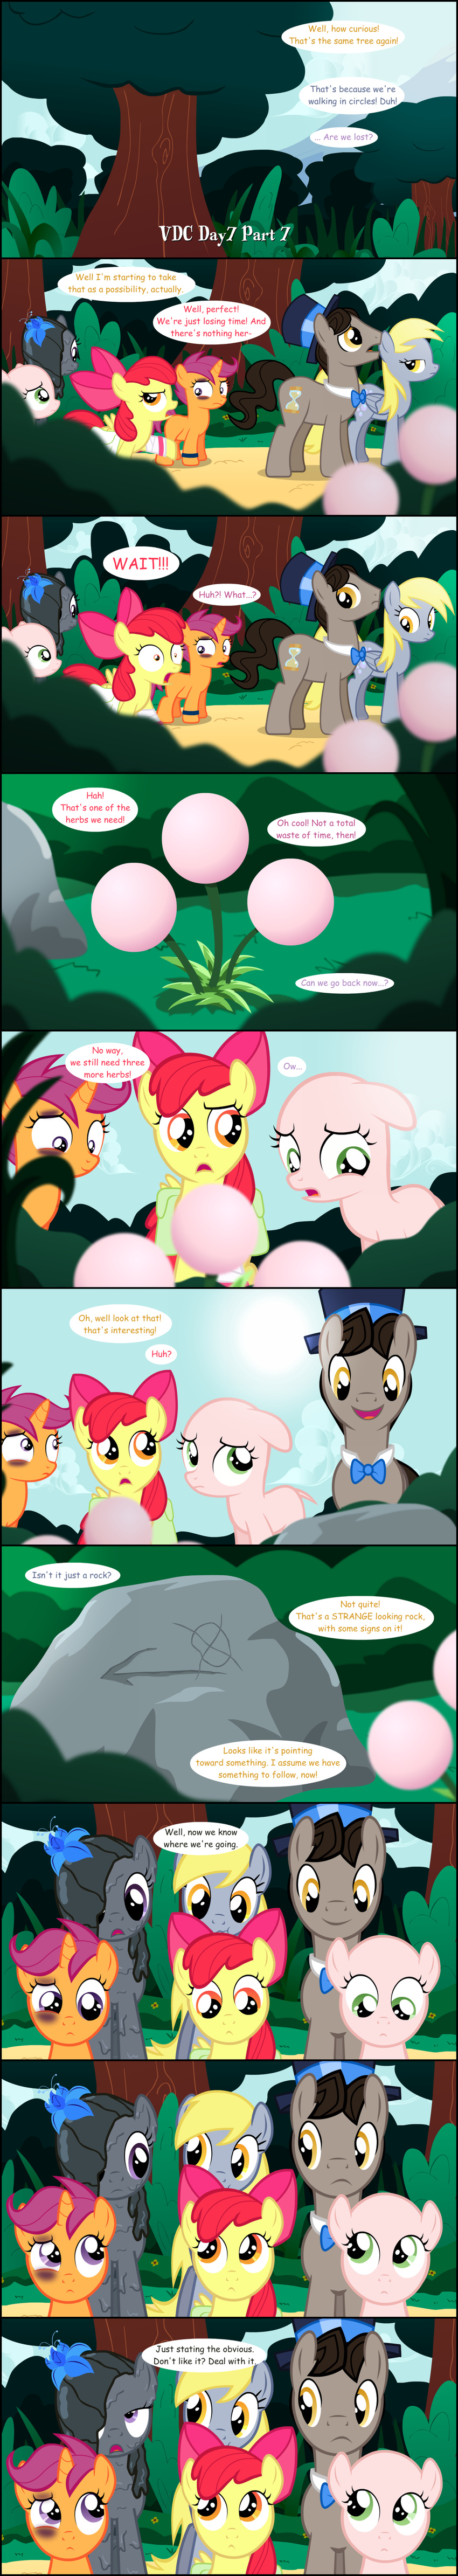 bald comic cutie_mark_crusaders_(mlp) derpy_hooves_(mlp) doctor_whooves_(mlp) equine female feral forest friendship_is_magic hat horn horse inkie_pie_(mlp) jananimations mammal my_little_pony pegasus poison_joke pony scootaloo_(mlp) shiner sweetie_belle_(mlp) tree tumblr unicorn wings young